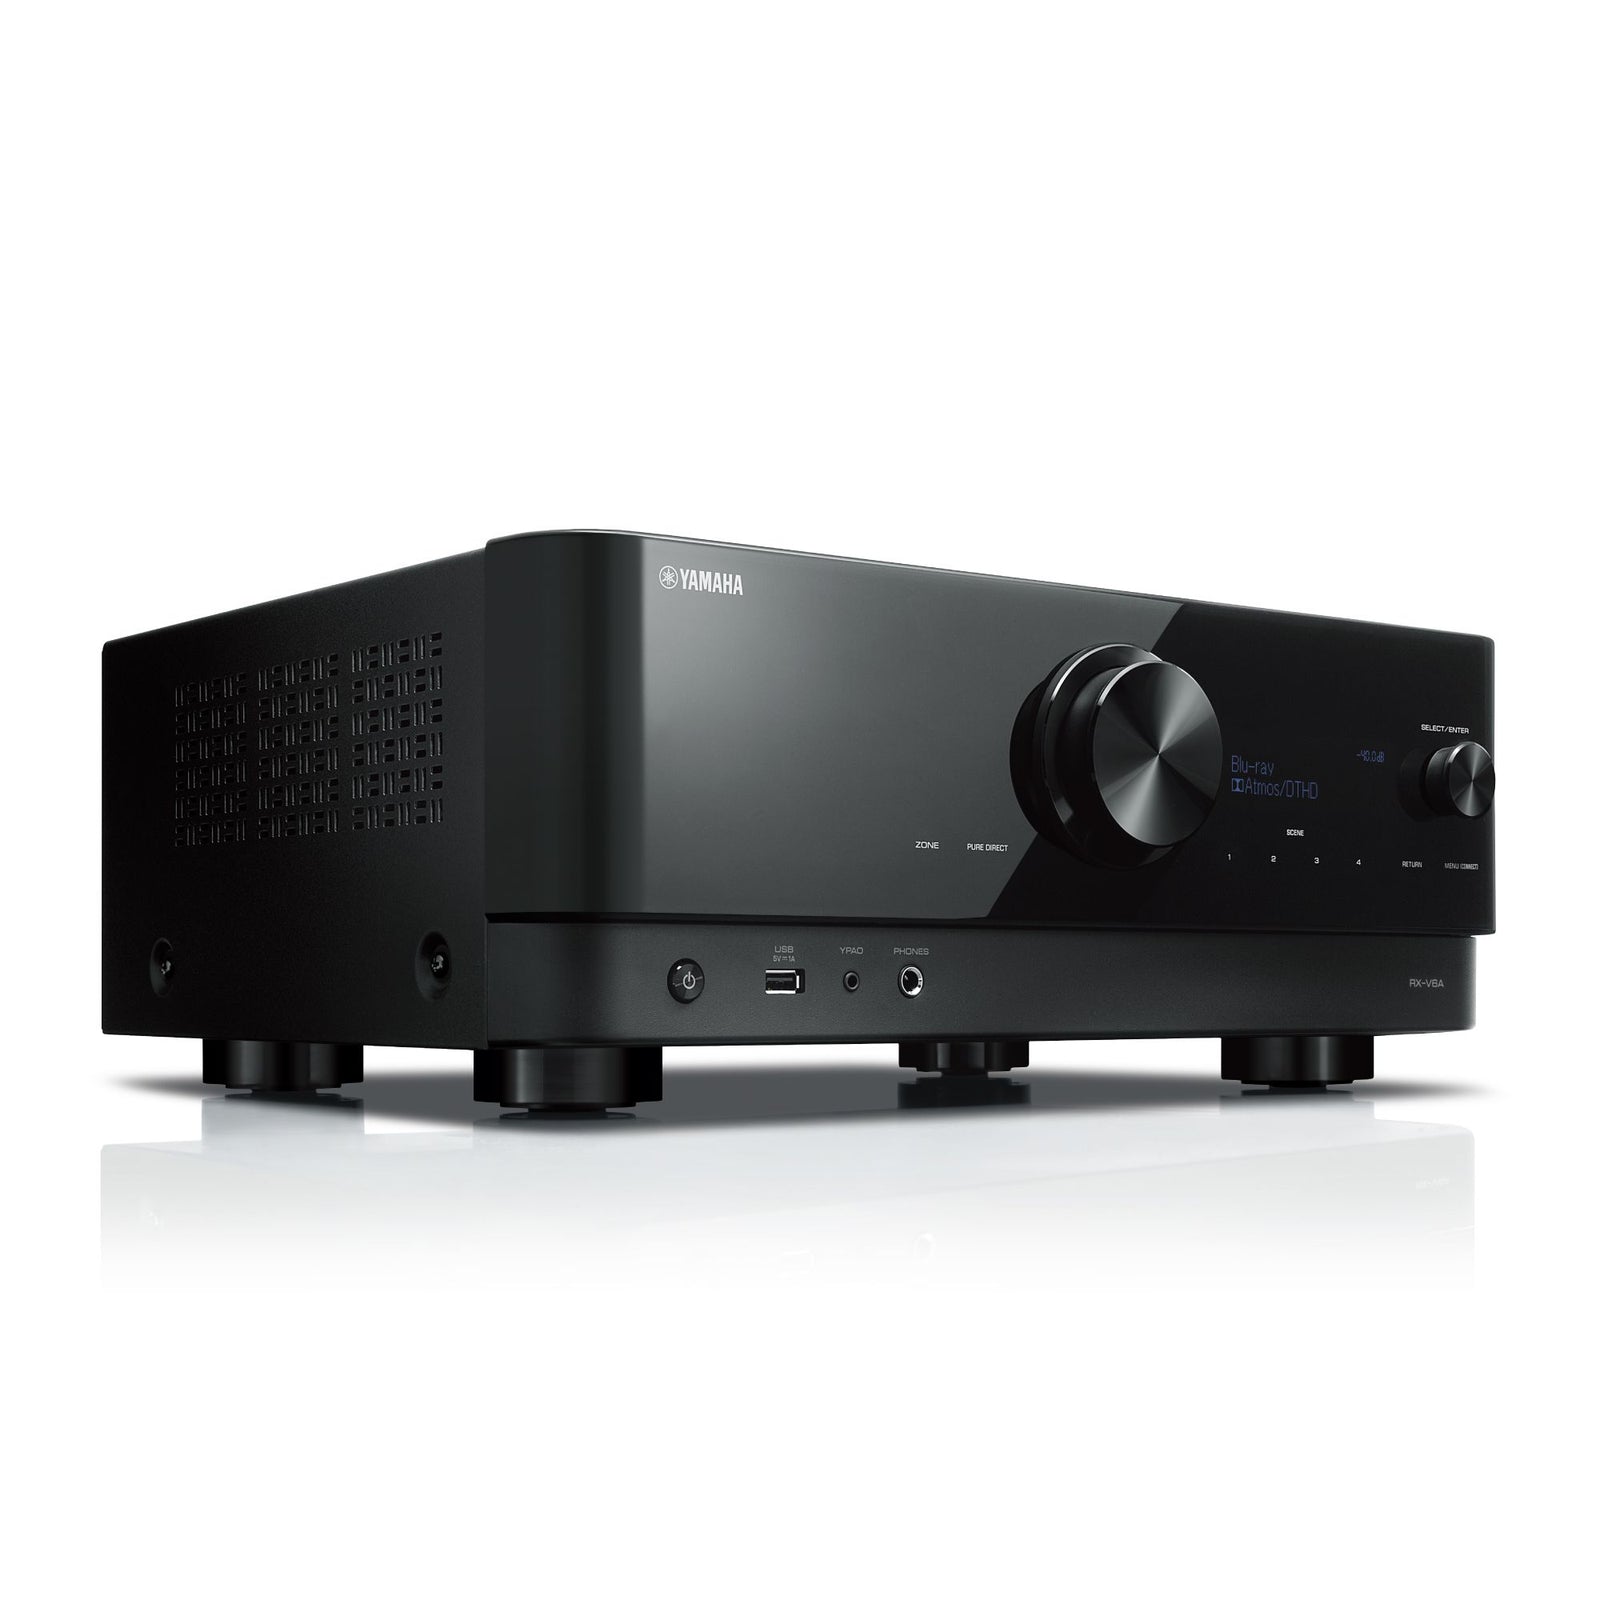 YAMAHA RX-V6A - RX-V AV RECEIVERS | VINYL SOUND - 7.2 ch AV receiver with CINEMA DSP 3D, HDMI™ 7-in/1-out, wireless surround. 7.2 Channel powerful surround sound with Zone2 Wi-Fi, Bluetooth®, AirPlay 2, Spotify Connect and MusicCast multi-room audio Dolby Atmos® with height virtualization HDMI™ 7 in/1 out Dedicated gaming function(ALLM,VRR,QMS,QFT)